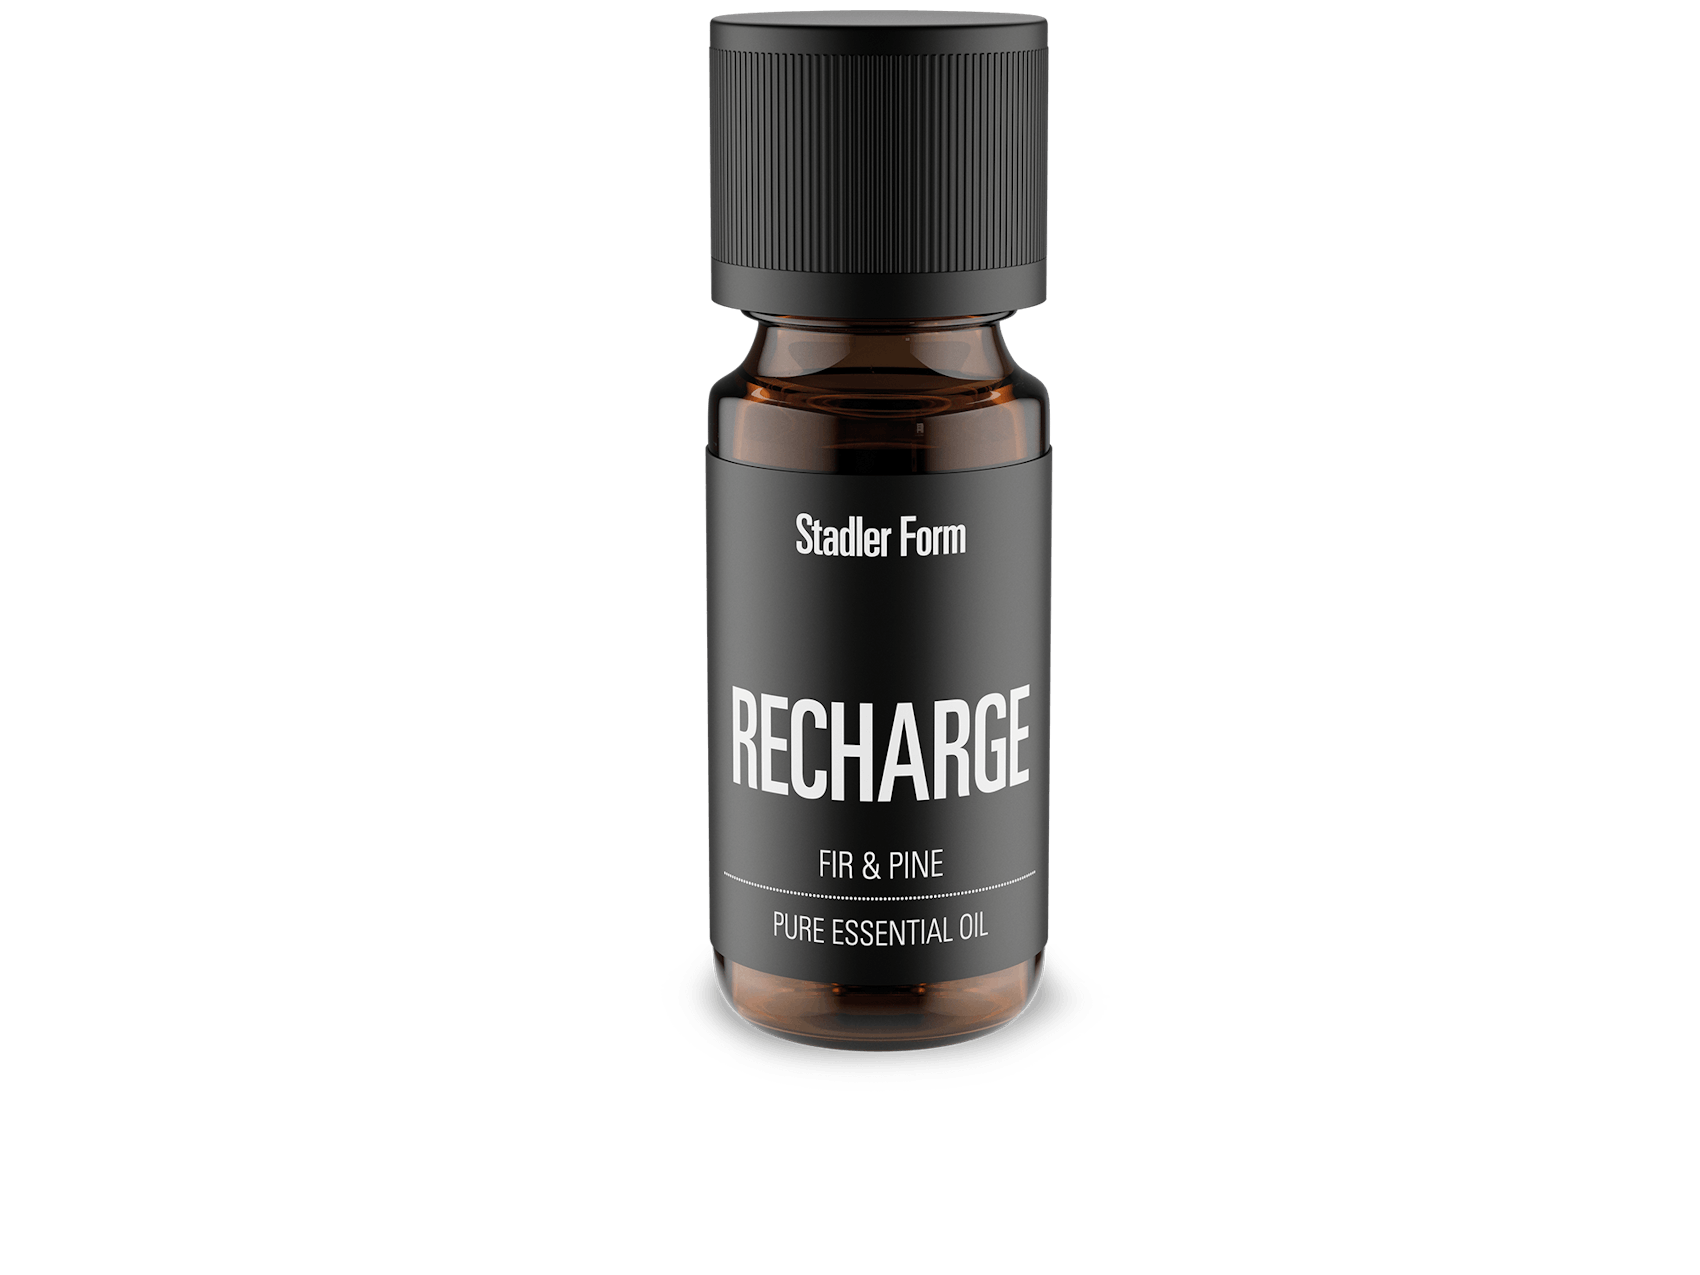 Recharge essential oil by Stadler Form